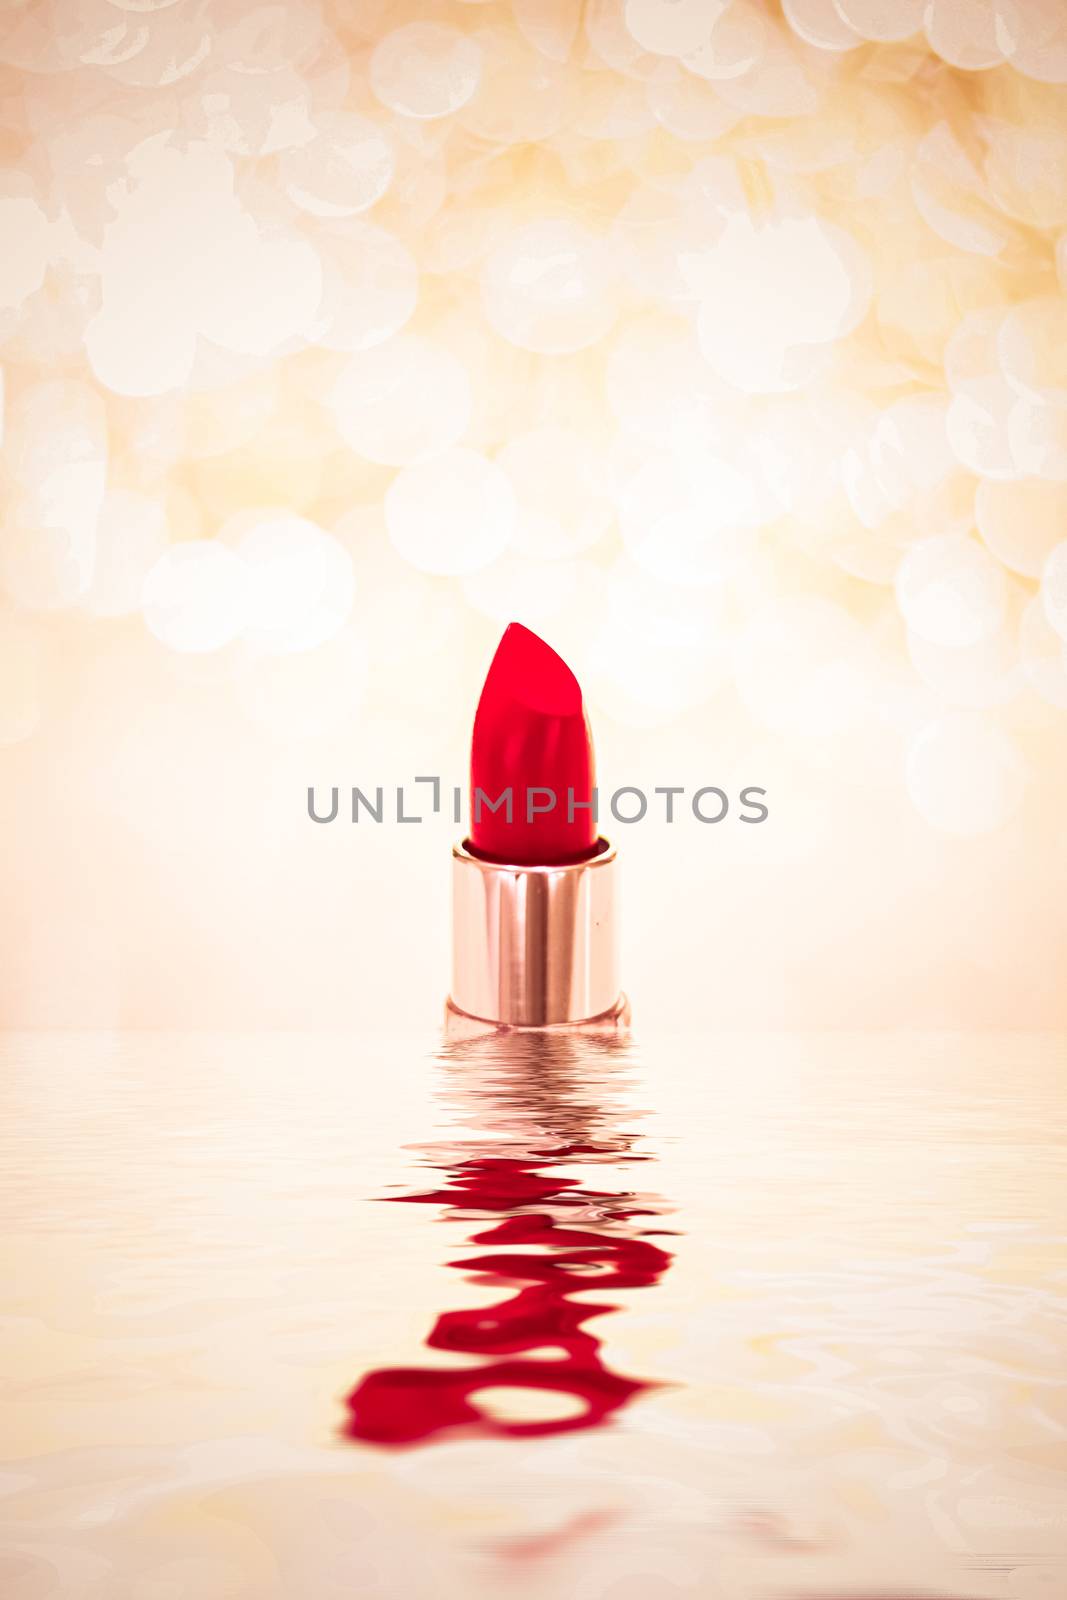 Red lipstick on golden background, make-up and cosmetics product